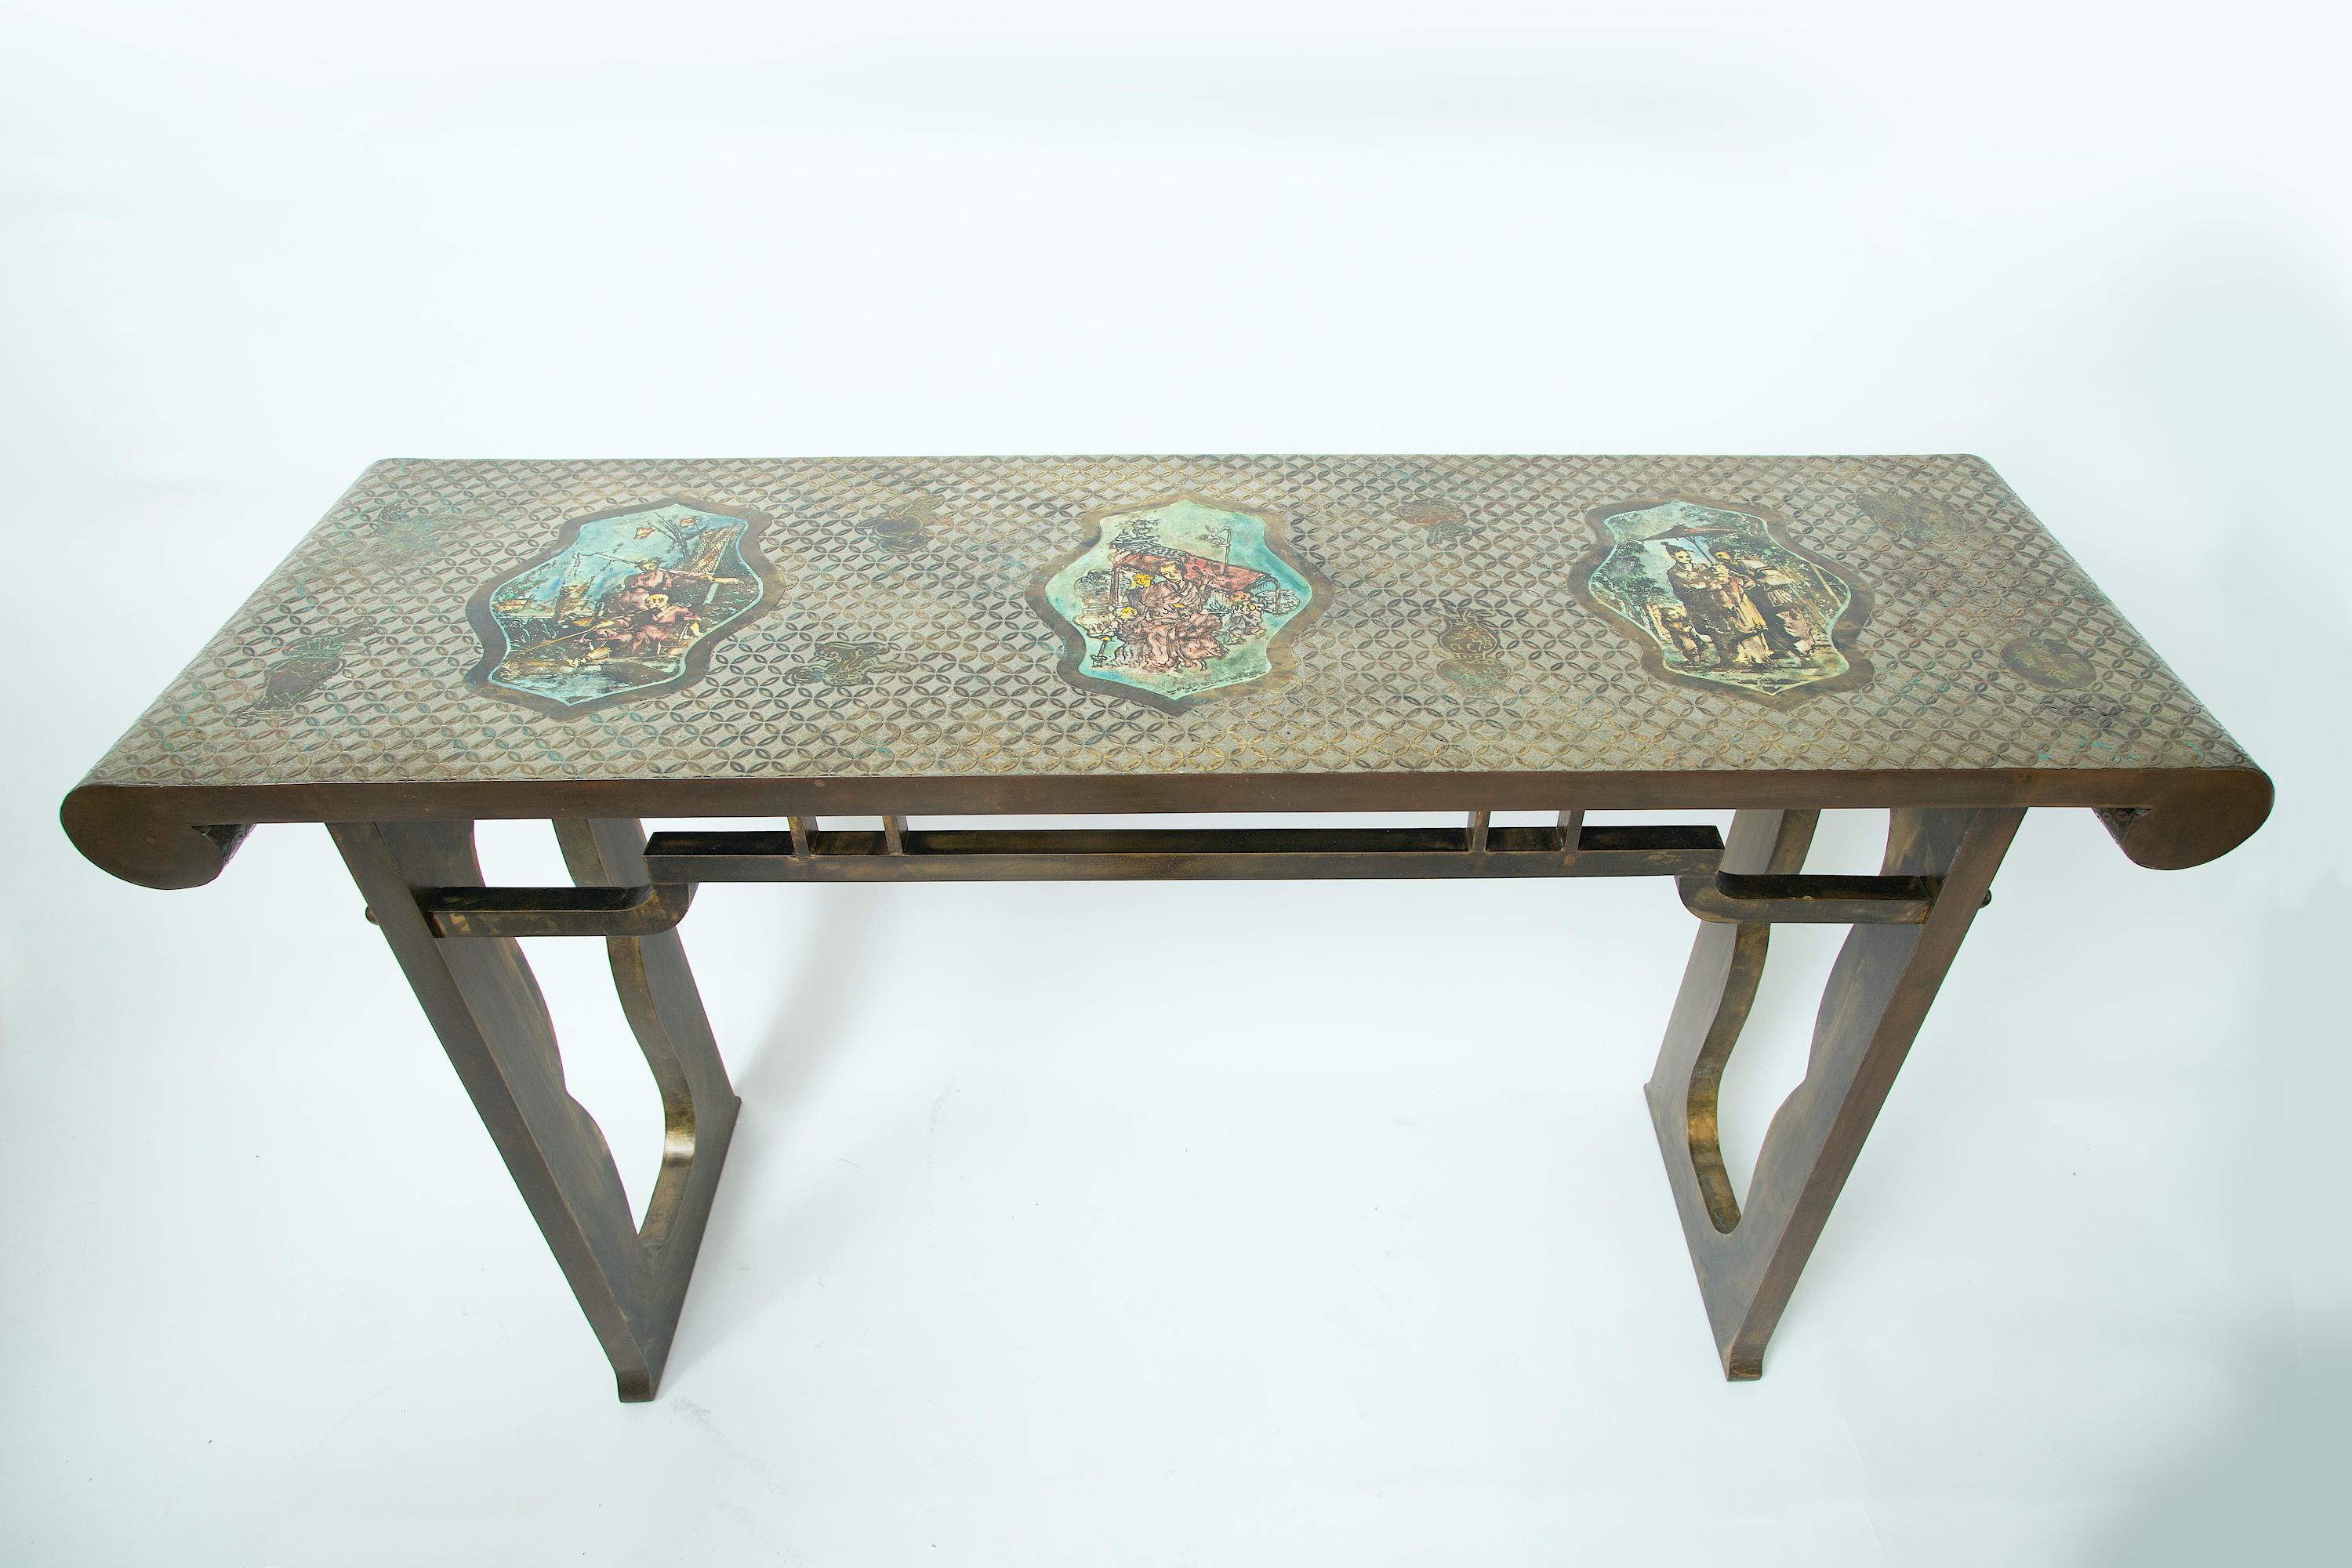 An extremely rare form.
The acid-etched and enameled surface is in beautiful original condition.
Raised signature on the console top, paper label and care instructions attached to underside of the table.
    